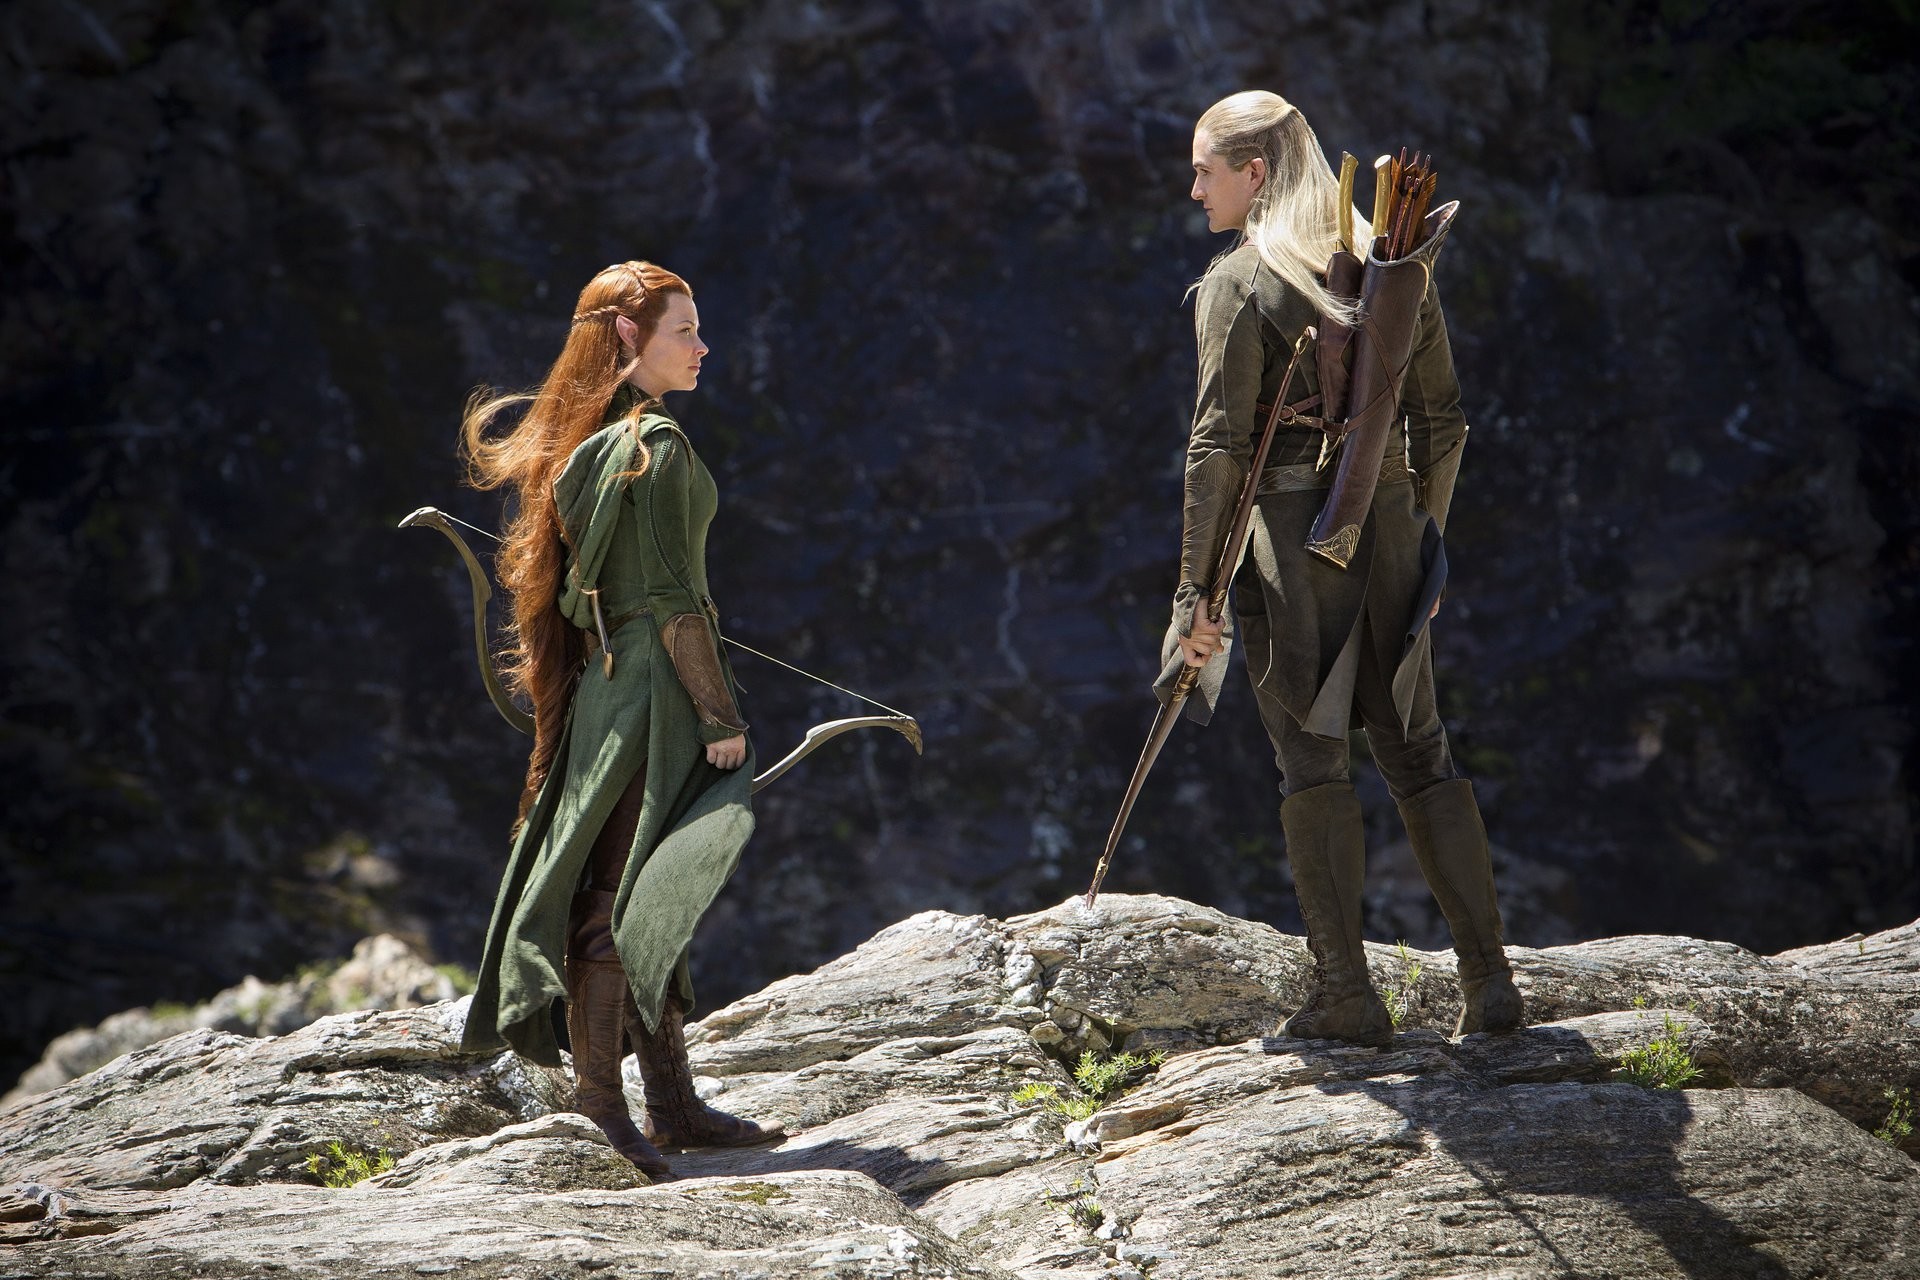 1920x1280 the hobbit or there and back again the hobbit: the desolation of smaug  orlando bloom